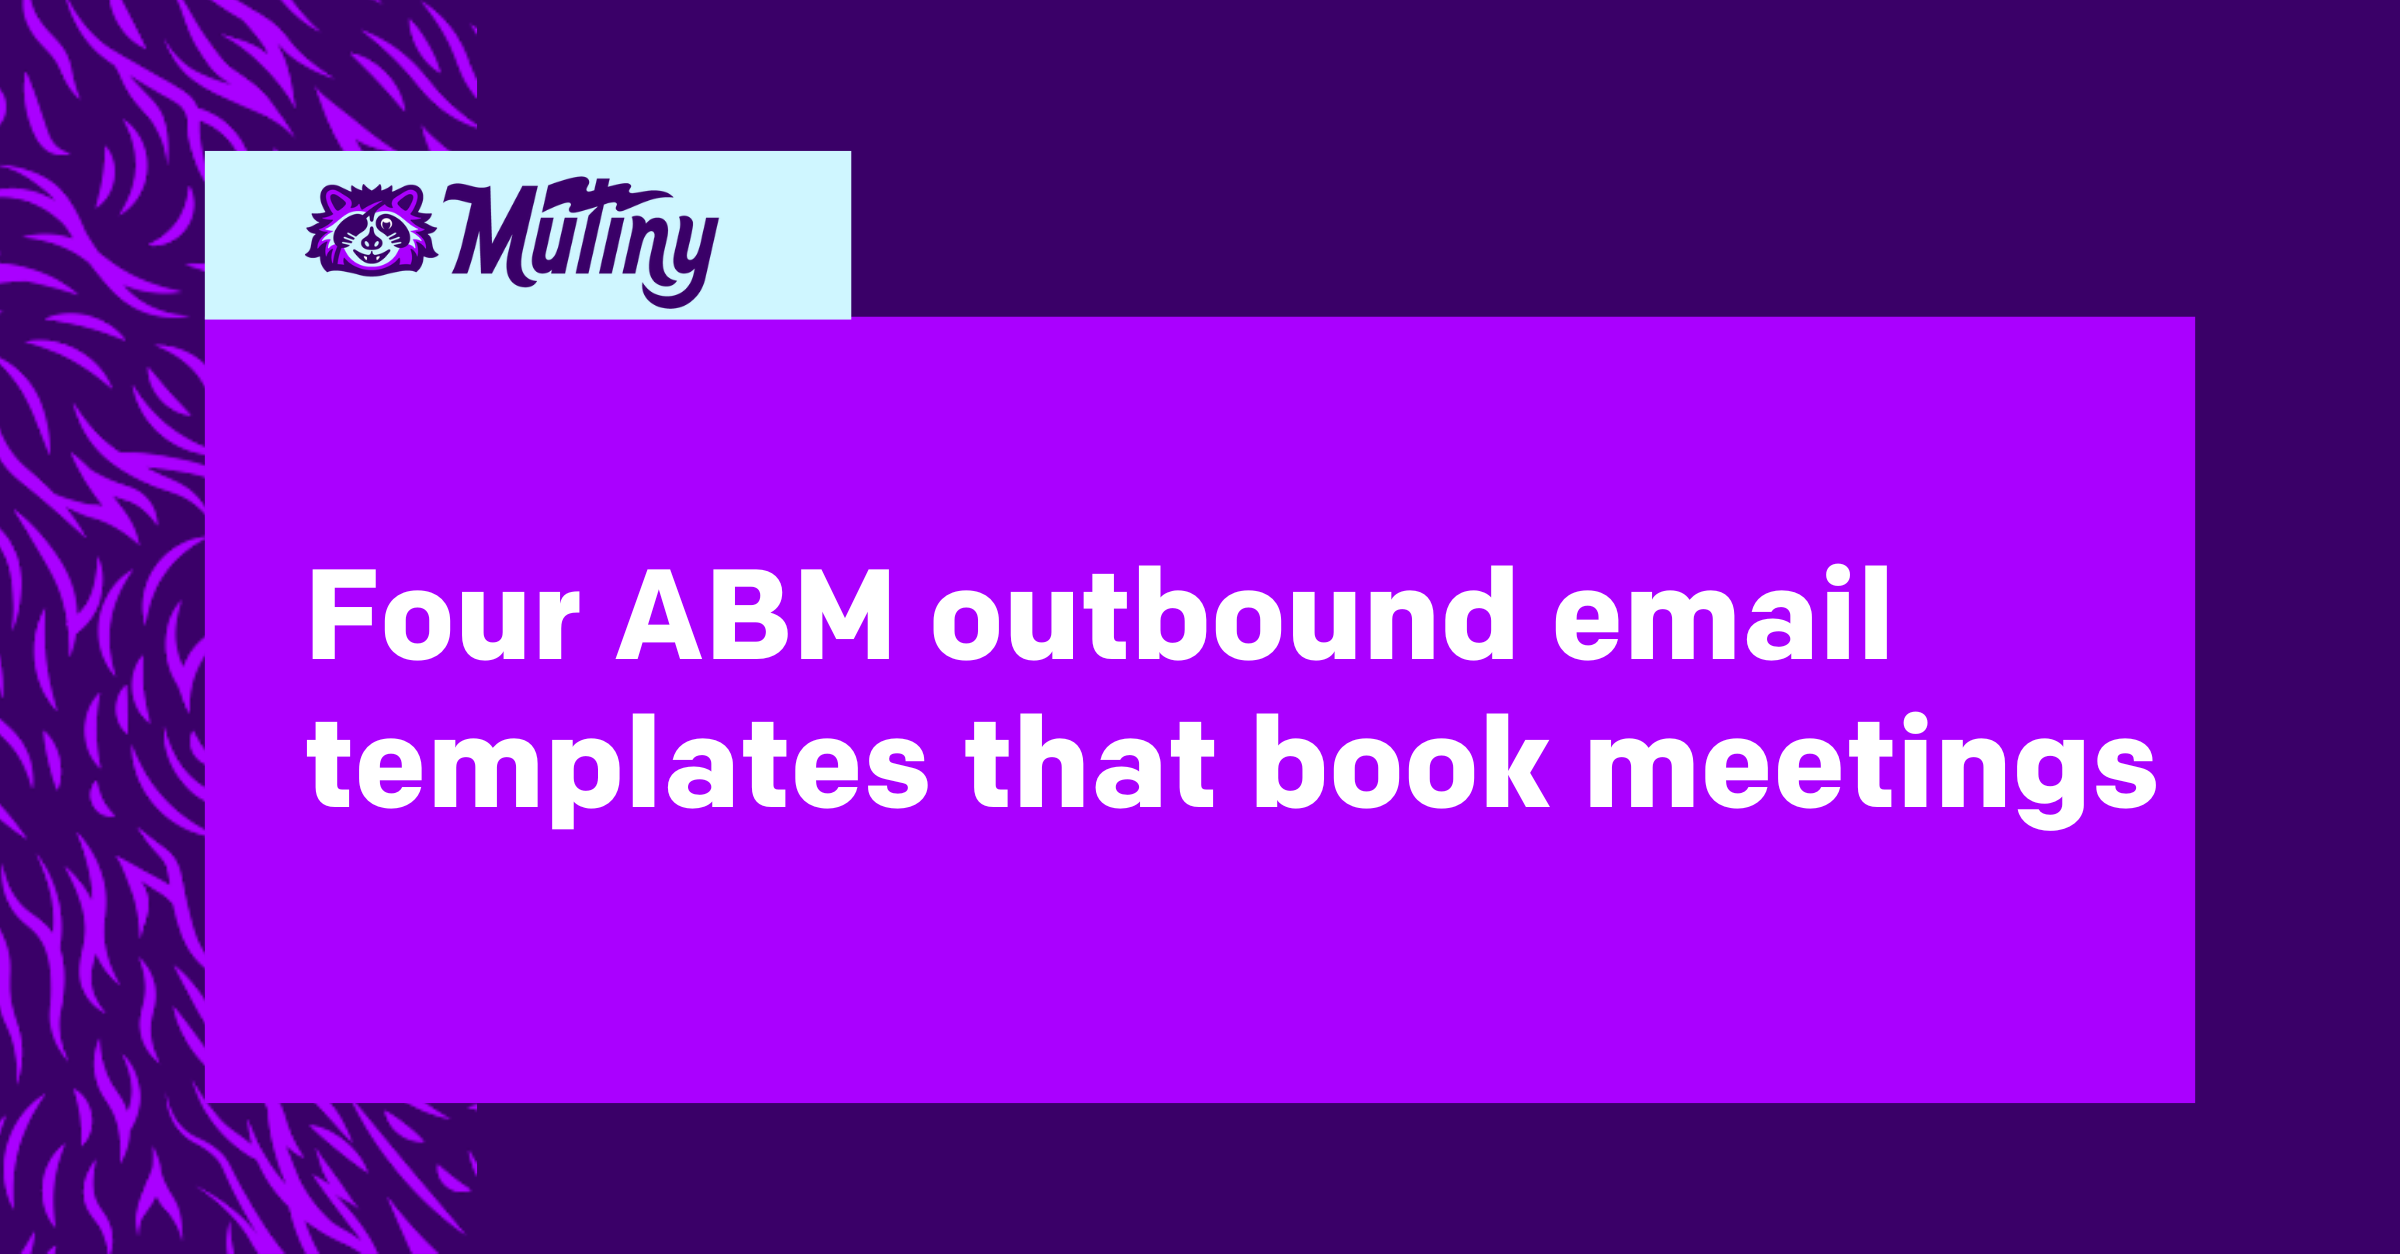 Four proven ABM outbound email templates that book meetings